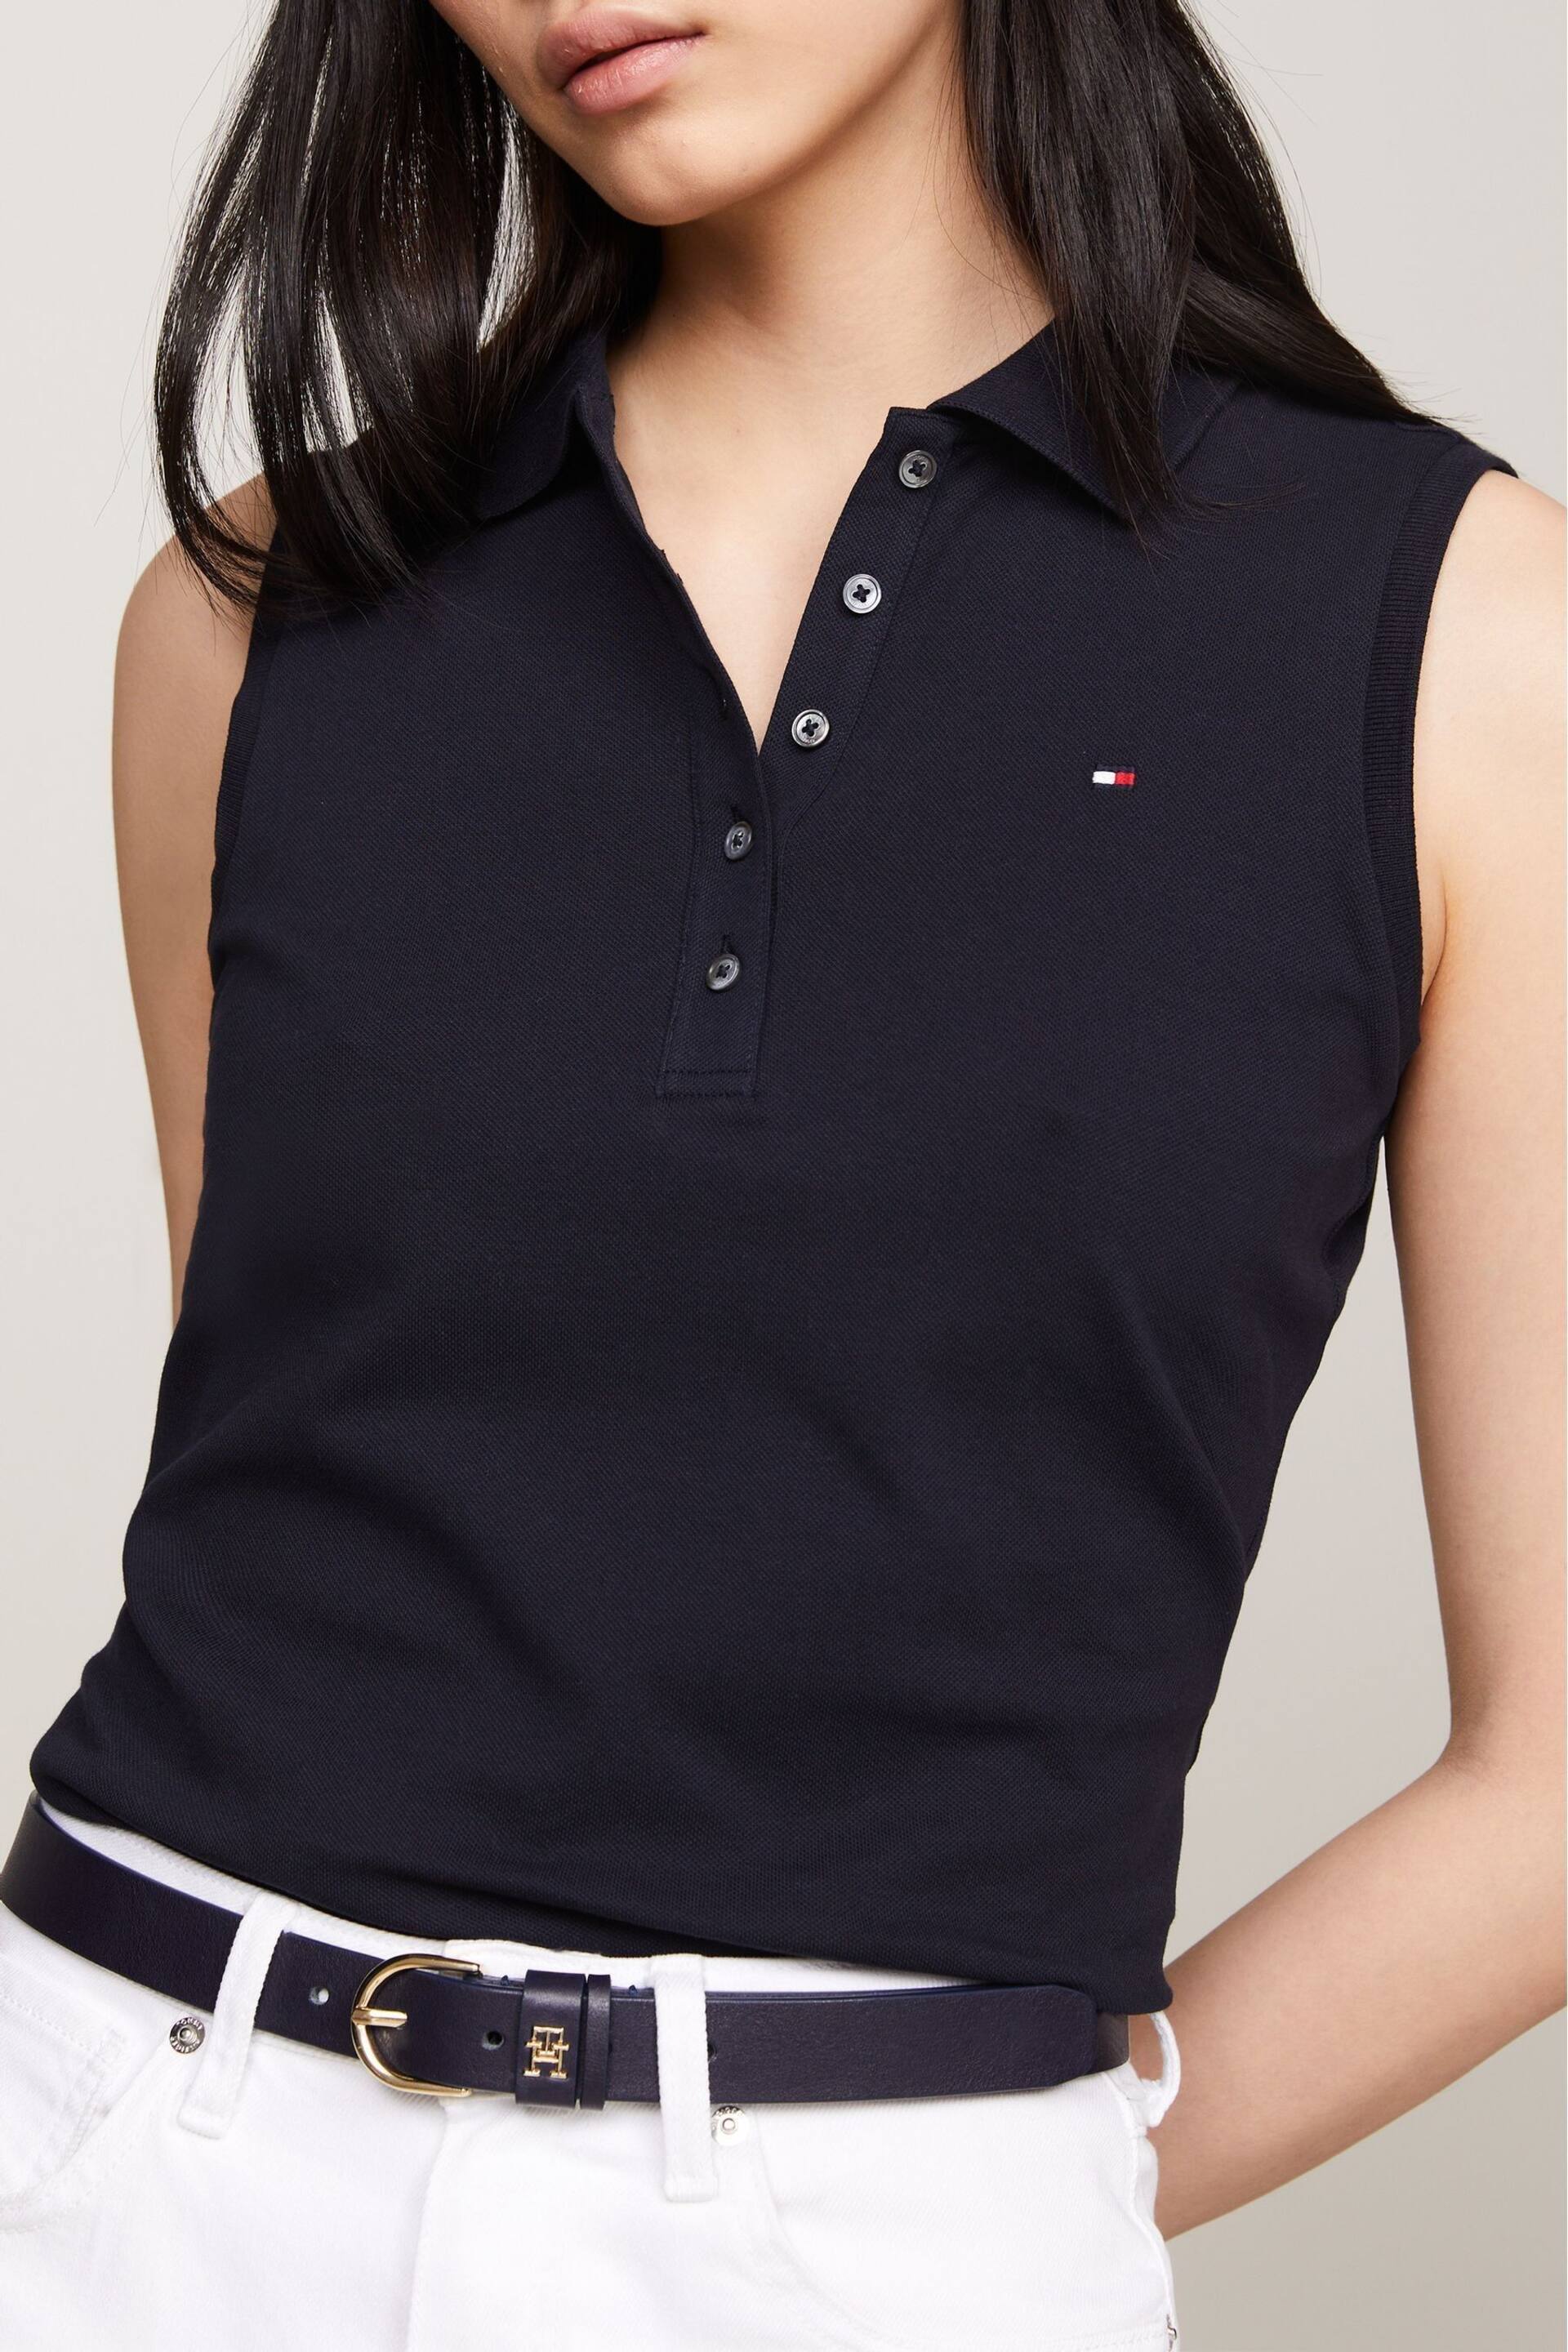 Tommy Hilfiger Blue1985 Sleeveless Polo Top - Image 3 of 5